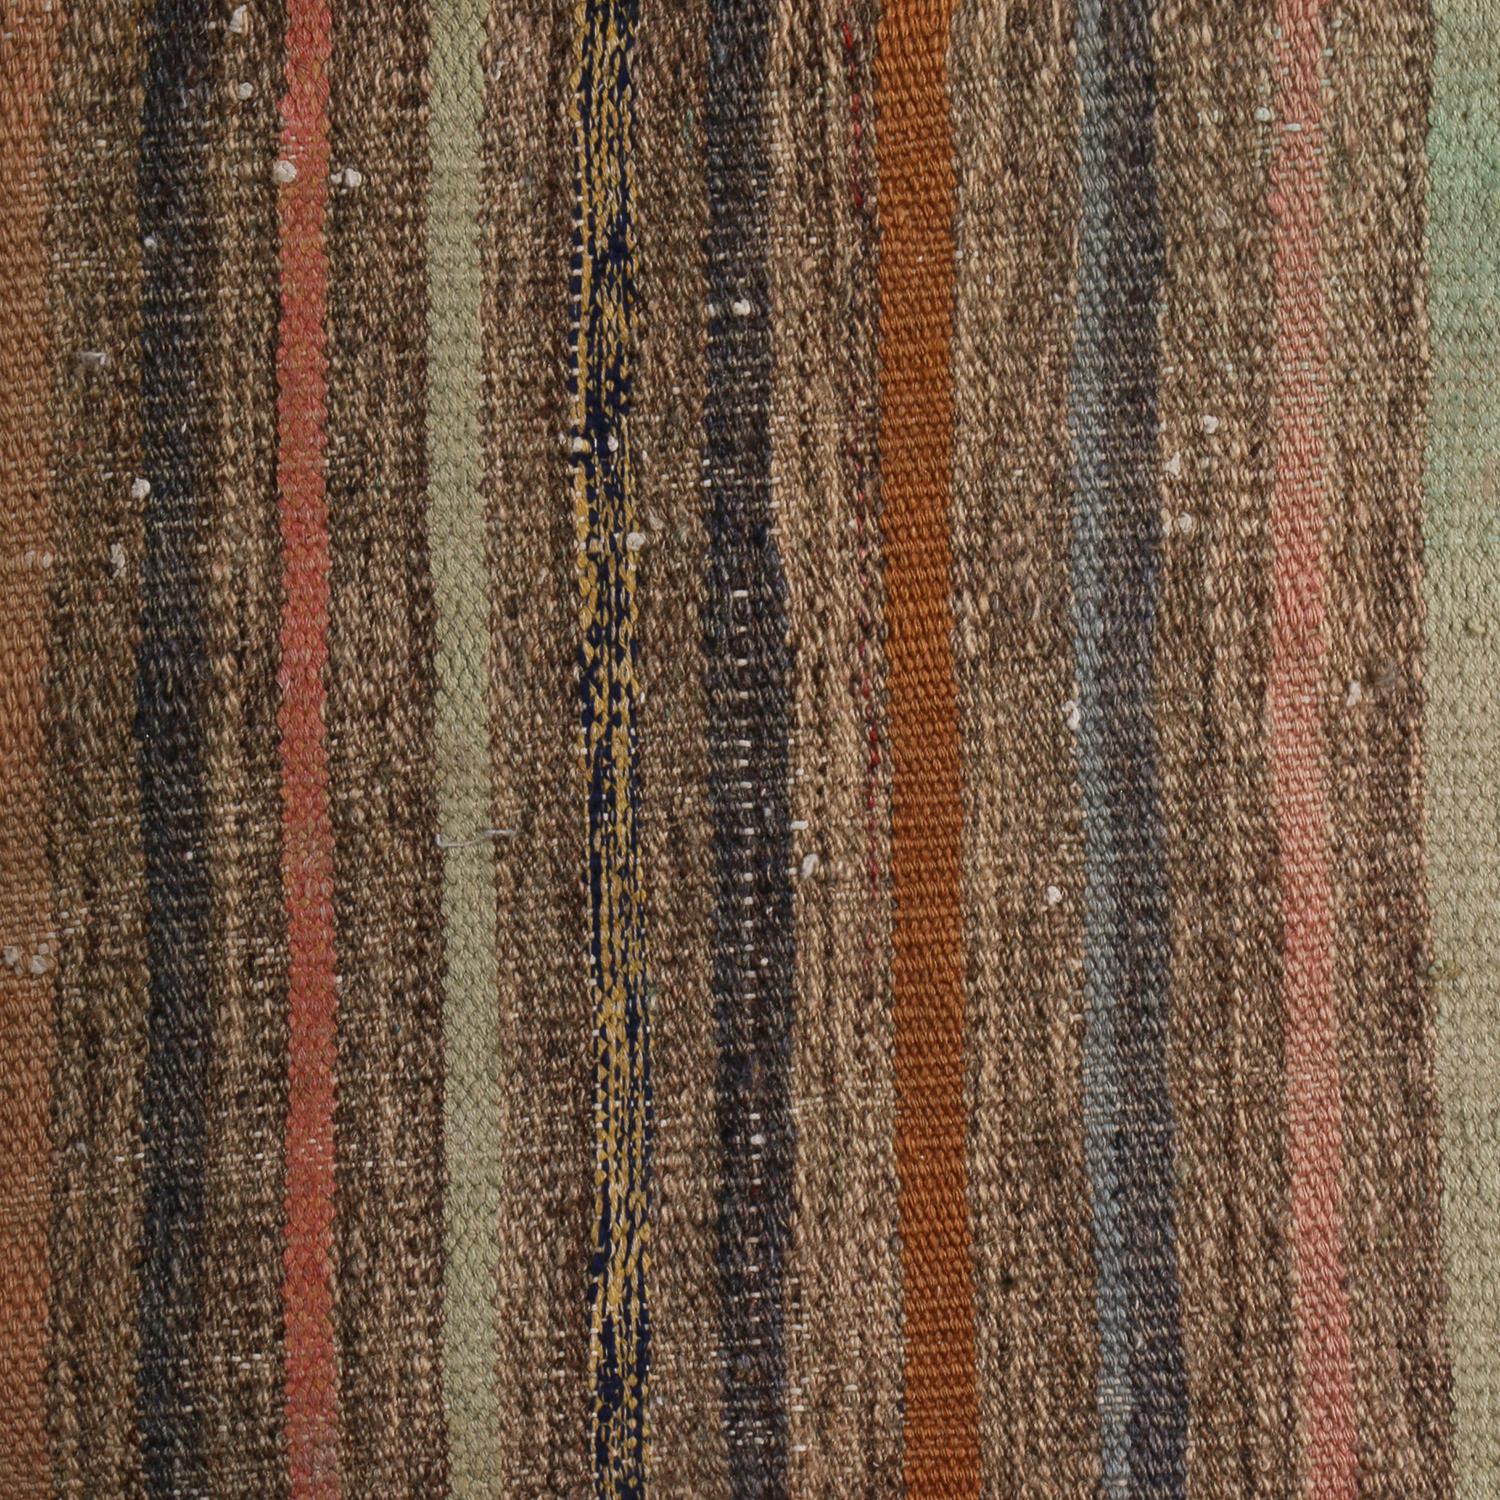 Vintage Striped Beige Brown and Multi-Color Wool Kilim Rug by Rug & Kilim In Good Condition For Sale In Long Island City, NY